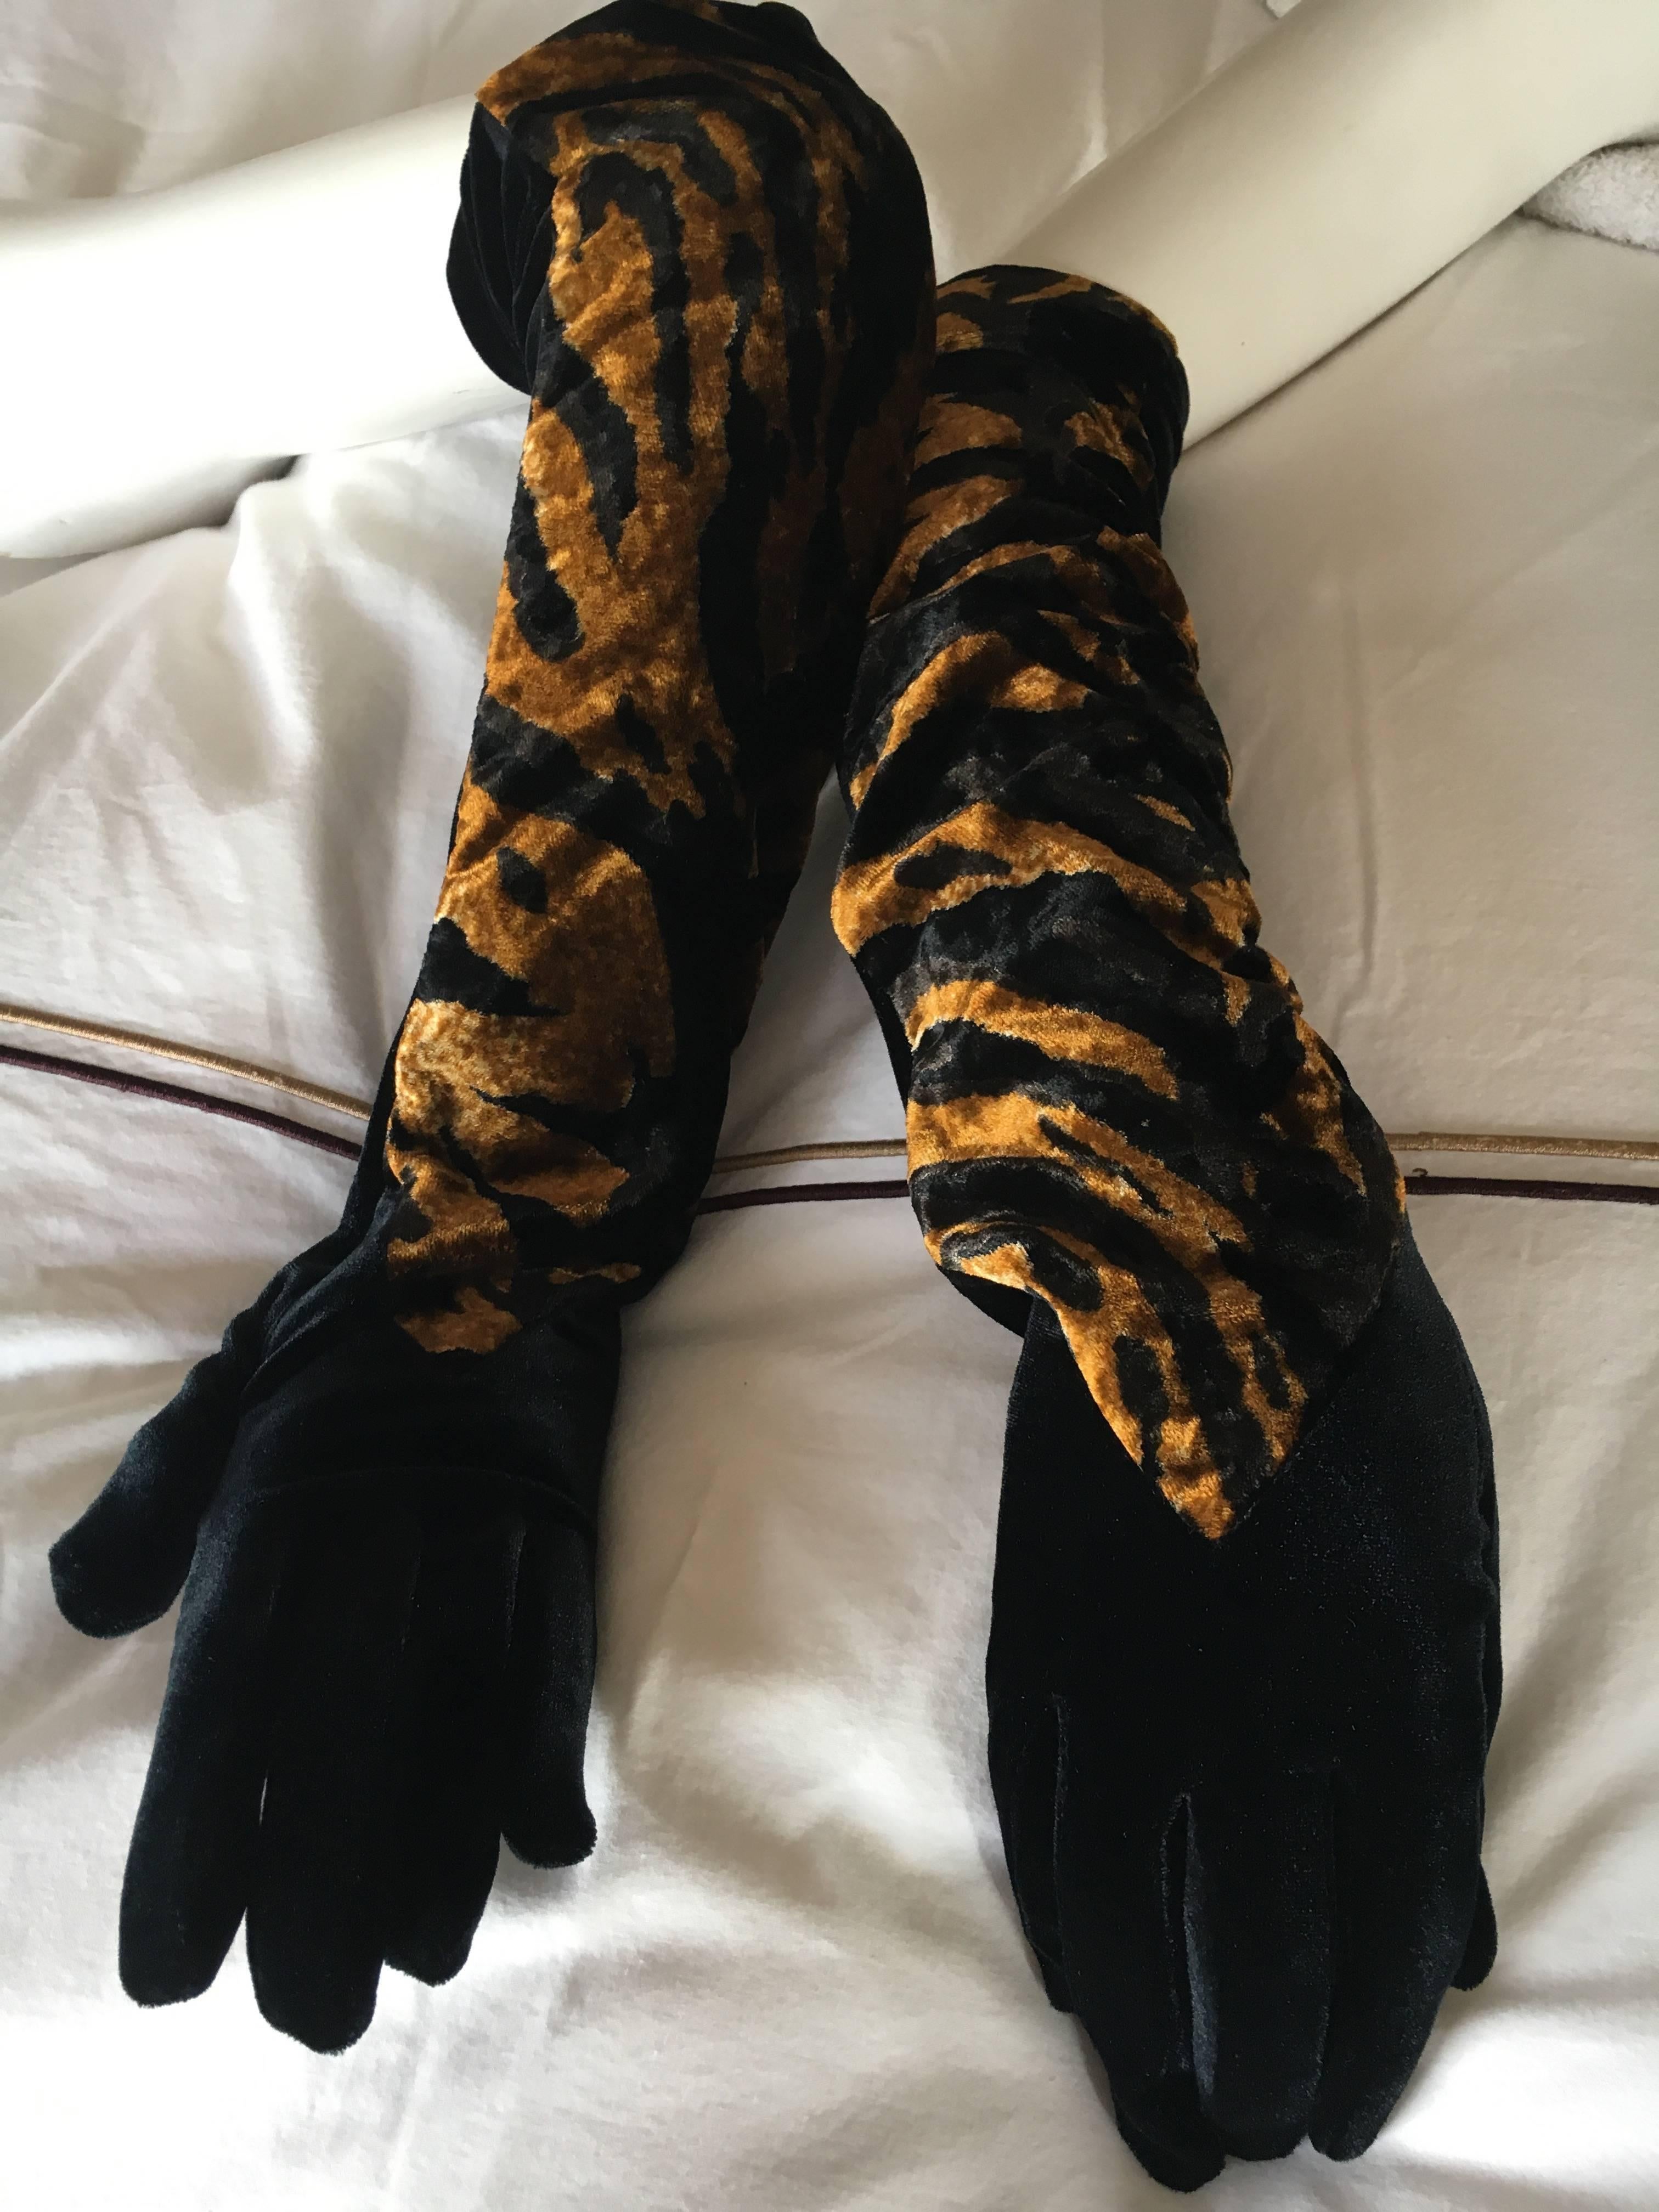 Soft velvet animal print gloves from Yves Saint Laurent Rive Guache, corca 1977.
New with tags
size 7 1/2